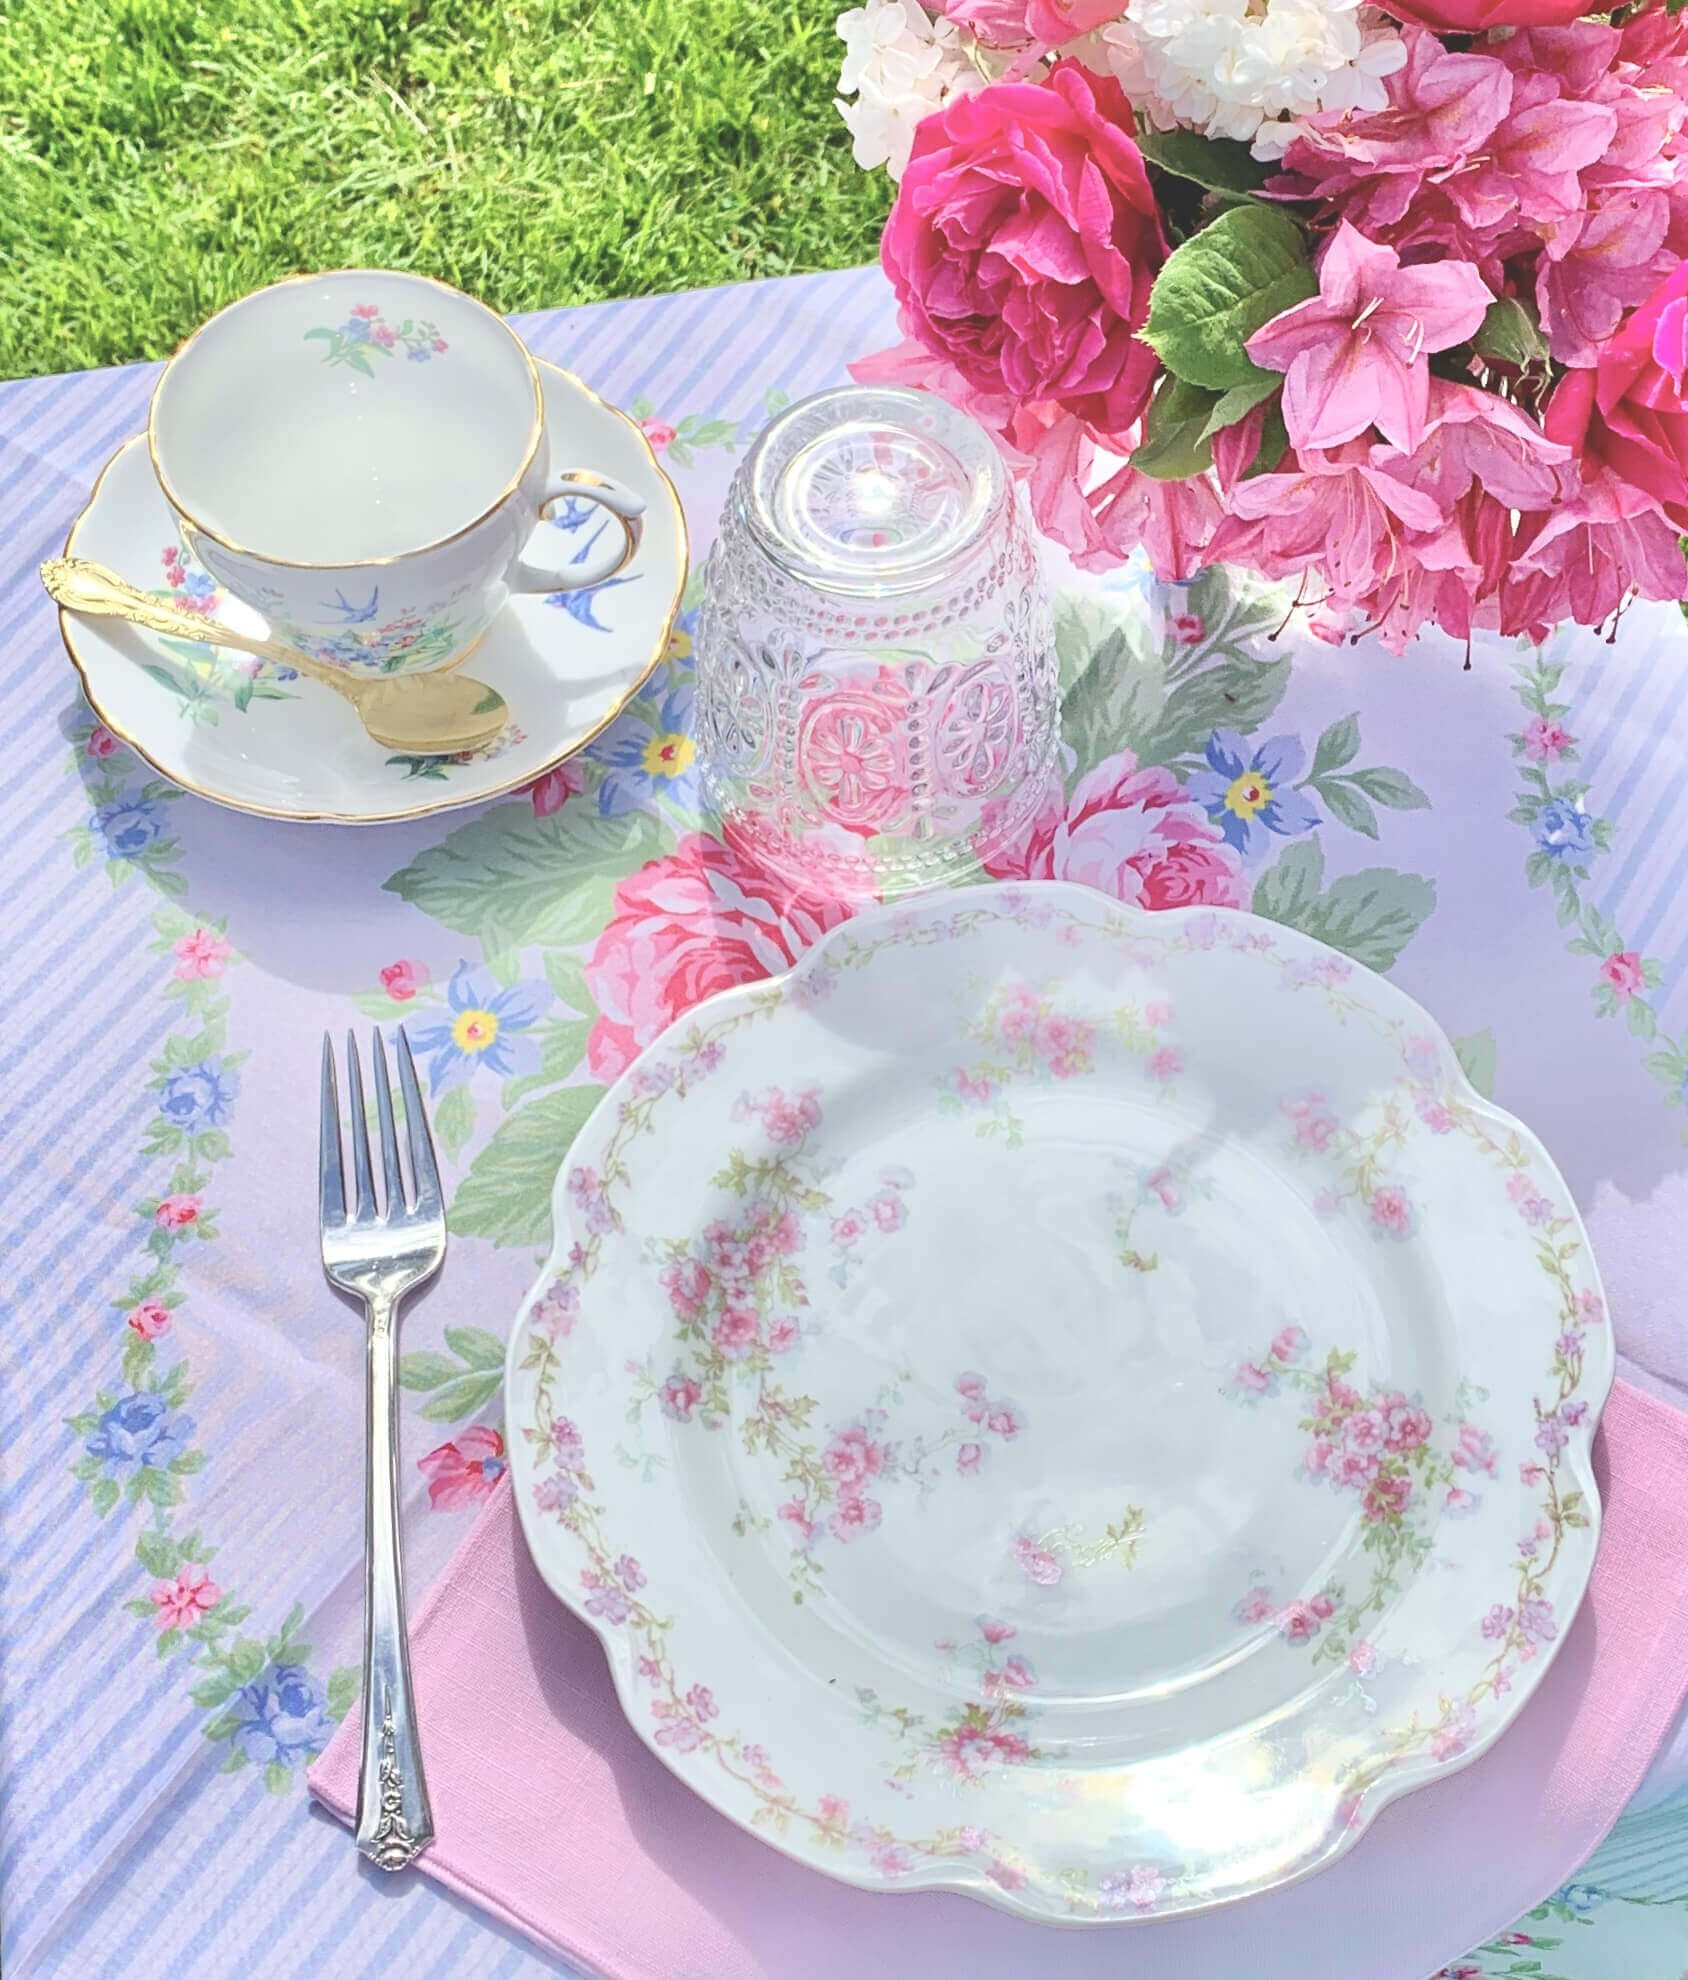 Blue and white striped tablecloth, pink floral crockery, teacup and saucer, clear glassware, pink floral decor